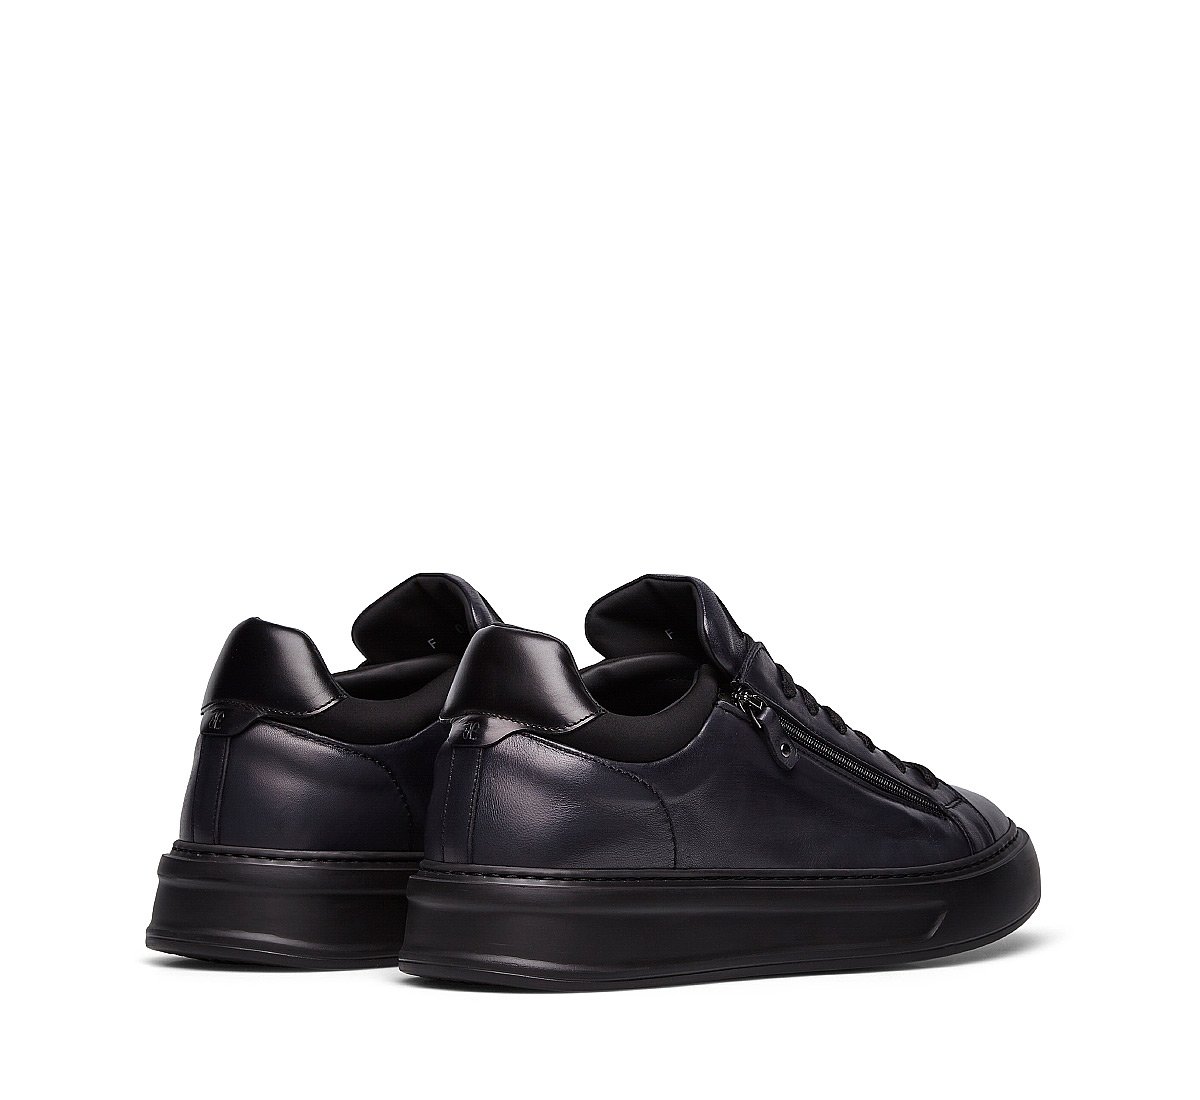 Nappa leather sneakers